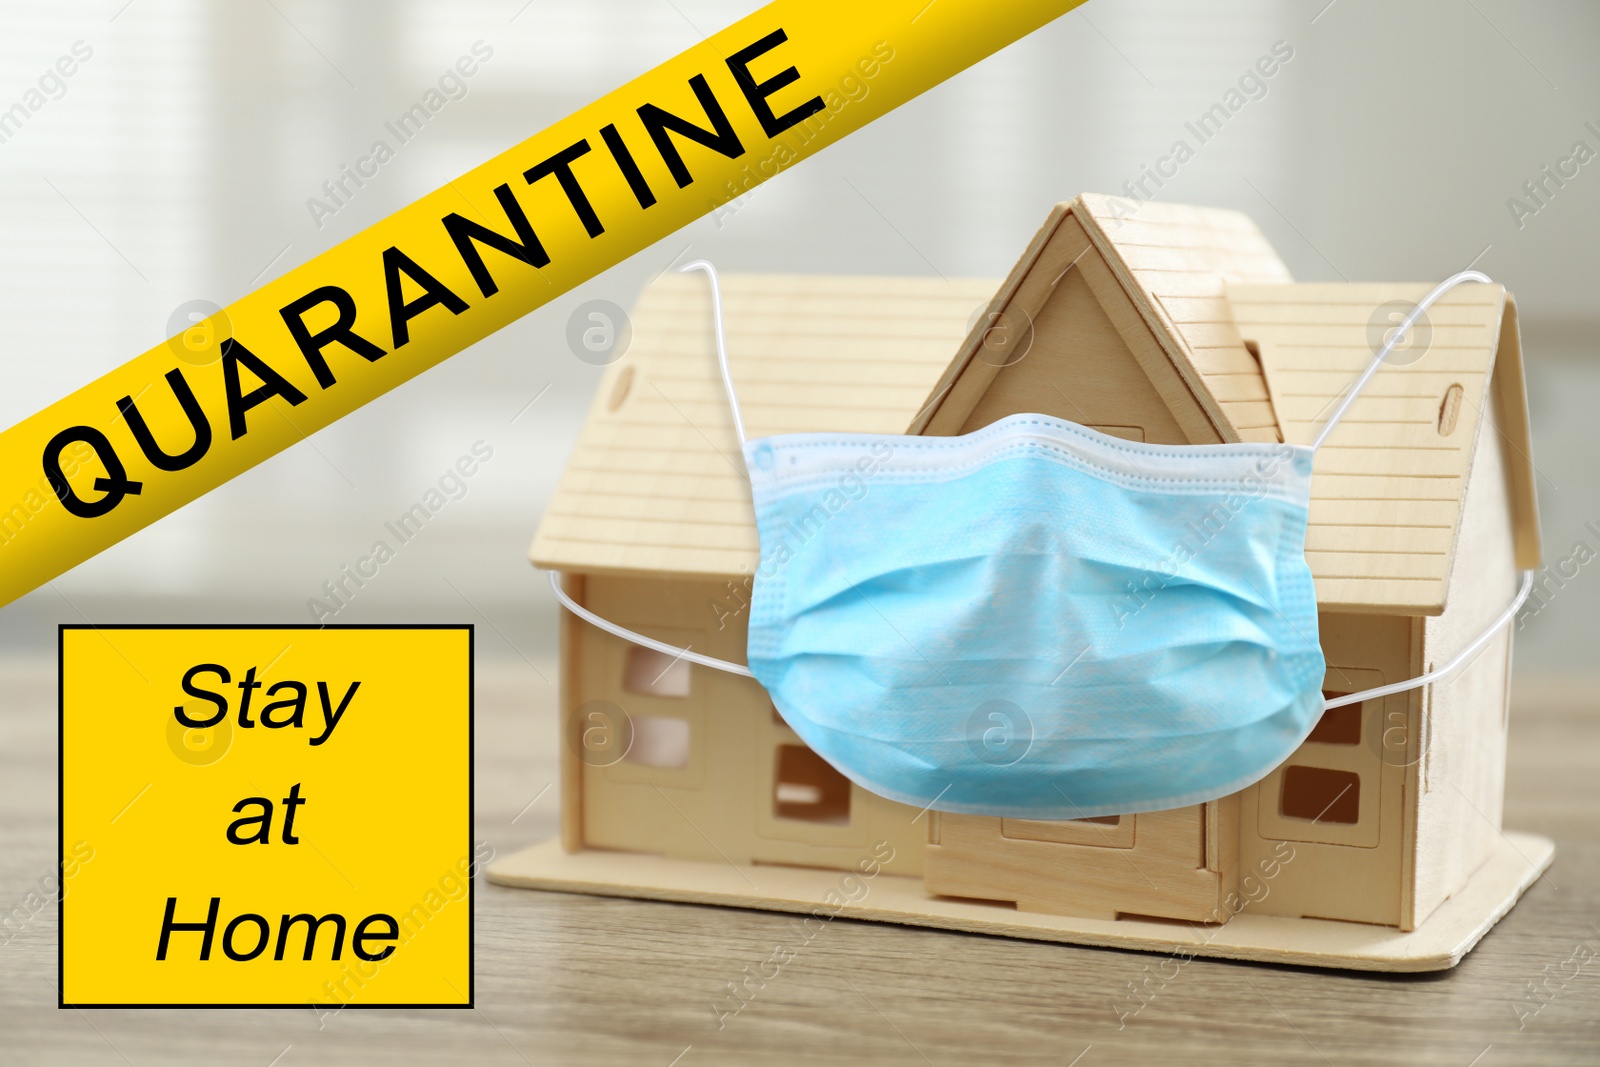 Image of Stay at home during coronavirus quarantine. Wooden house model with medical mask